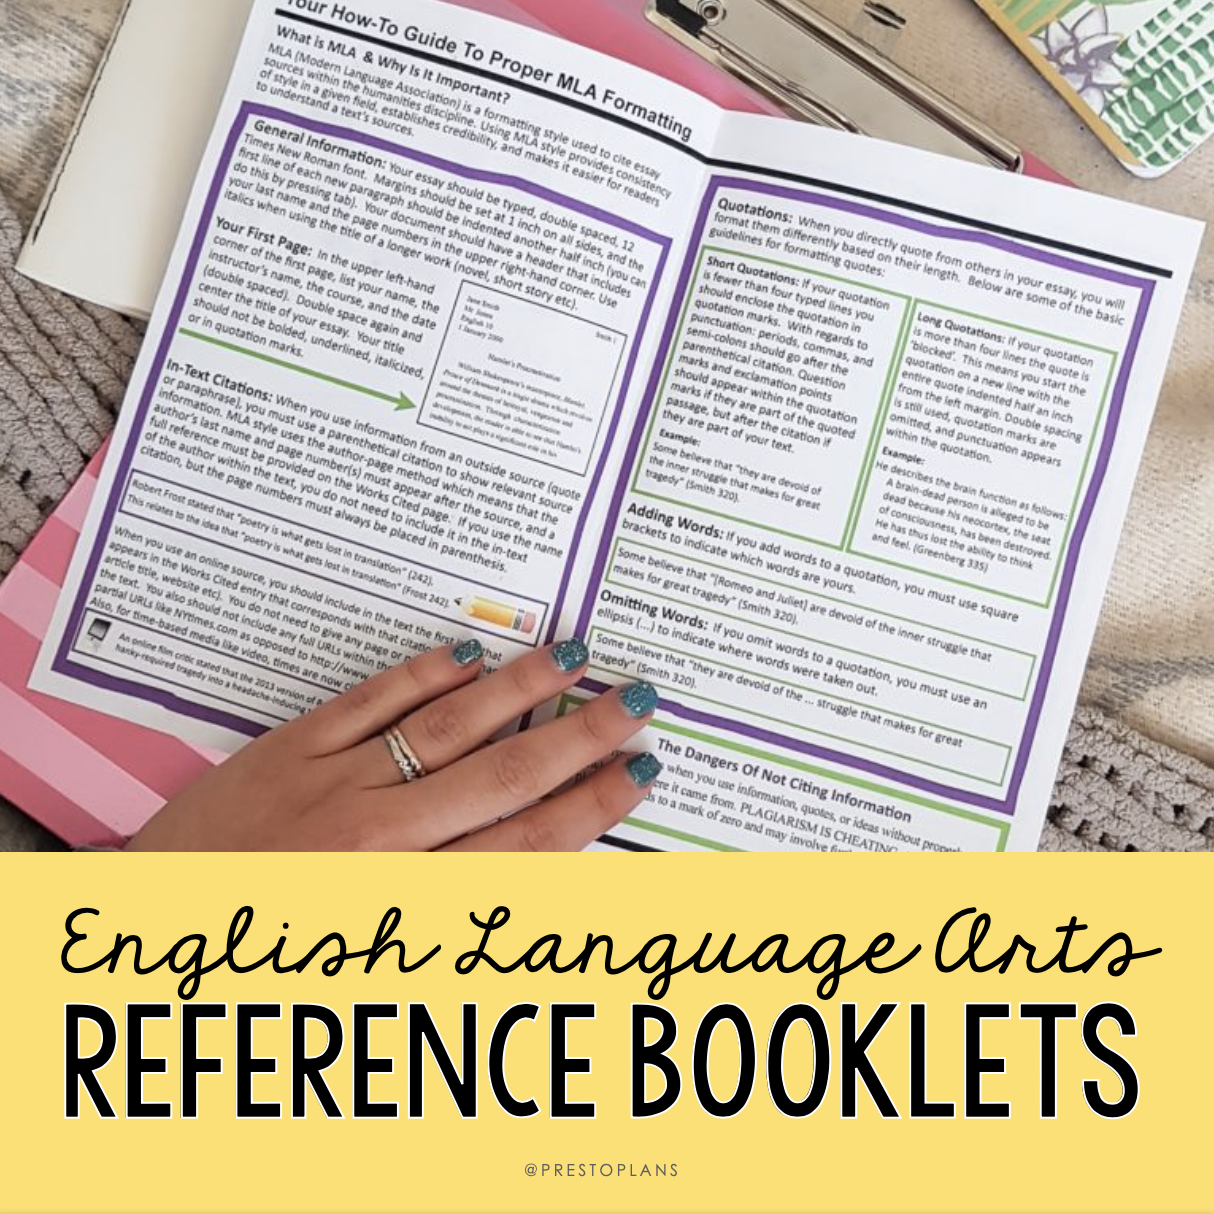 English Reference Booklets